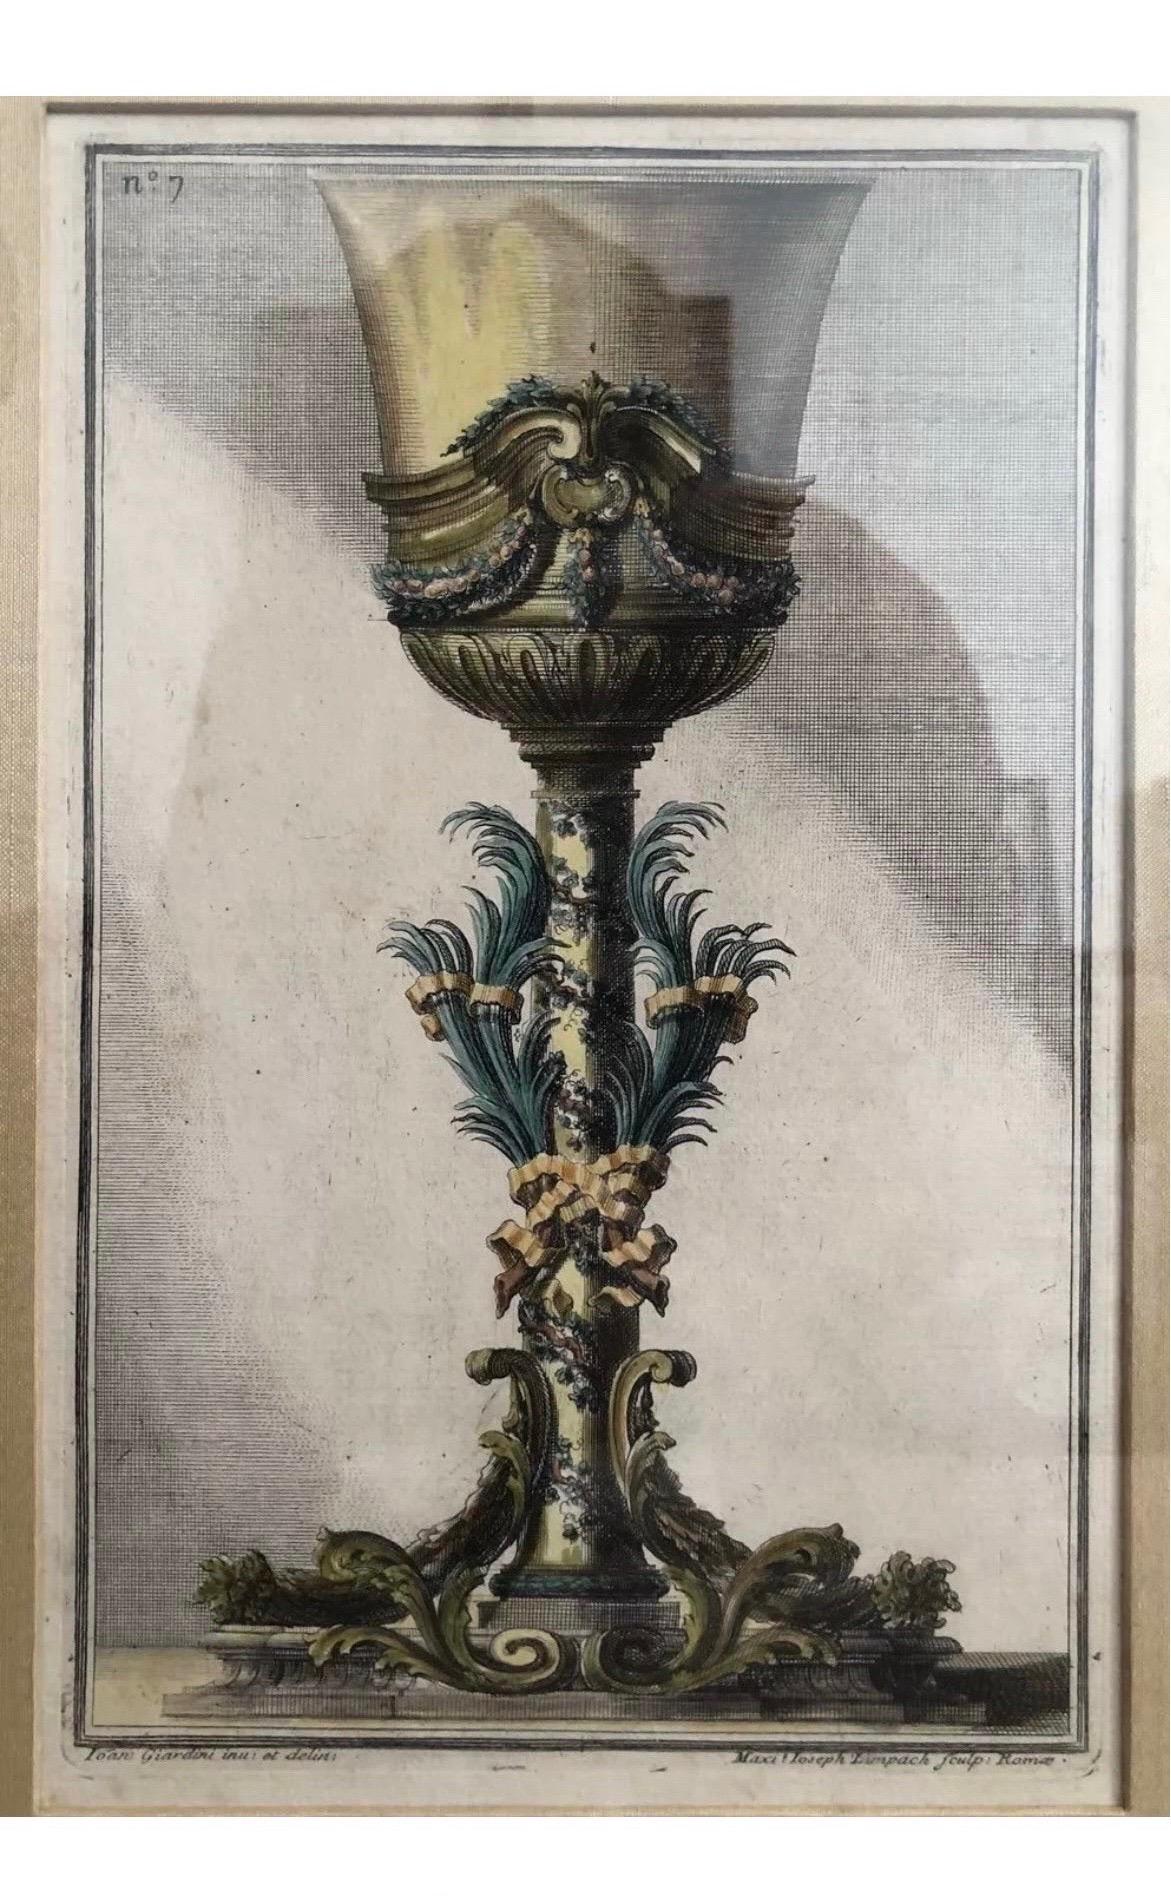 18th C. antique Royal cup ioan Giardini Maxi Joseph Limpach etching! 
Perfectly framed and hand colored.